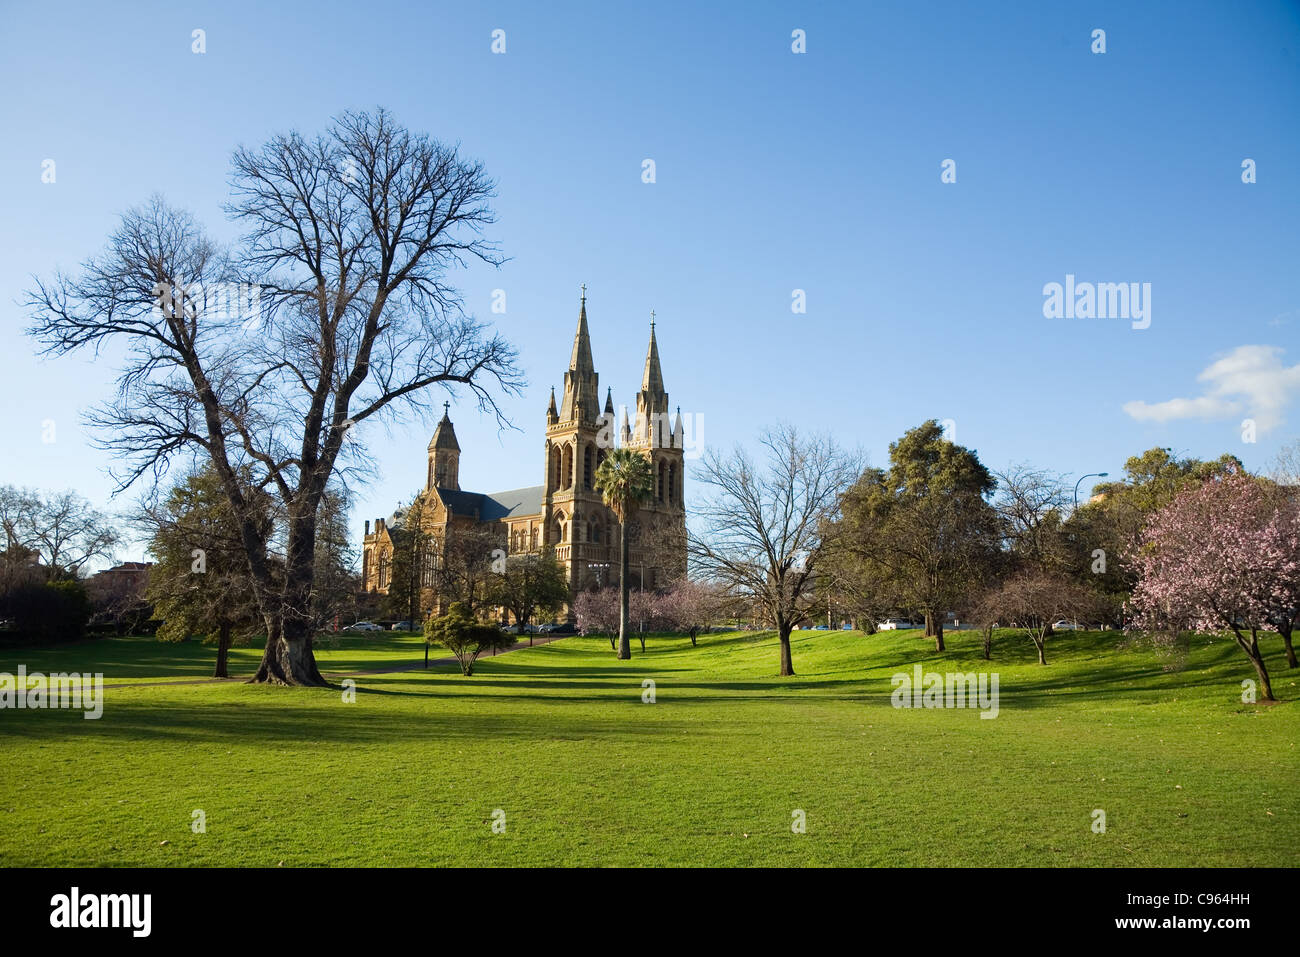 St Peter's Cathedral in North Adelaide.  Adelaide, South Australia, AUSTRALIA Stock Photo